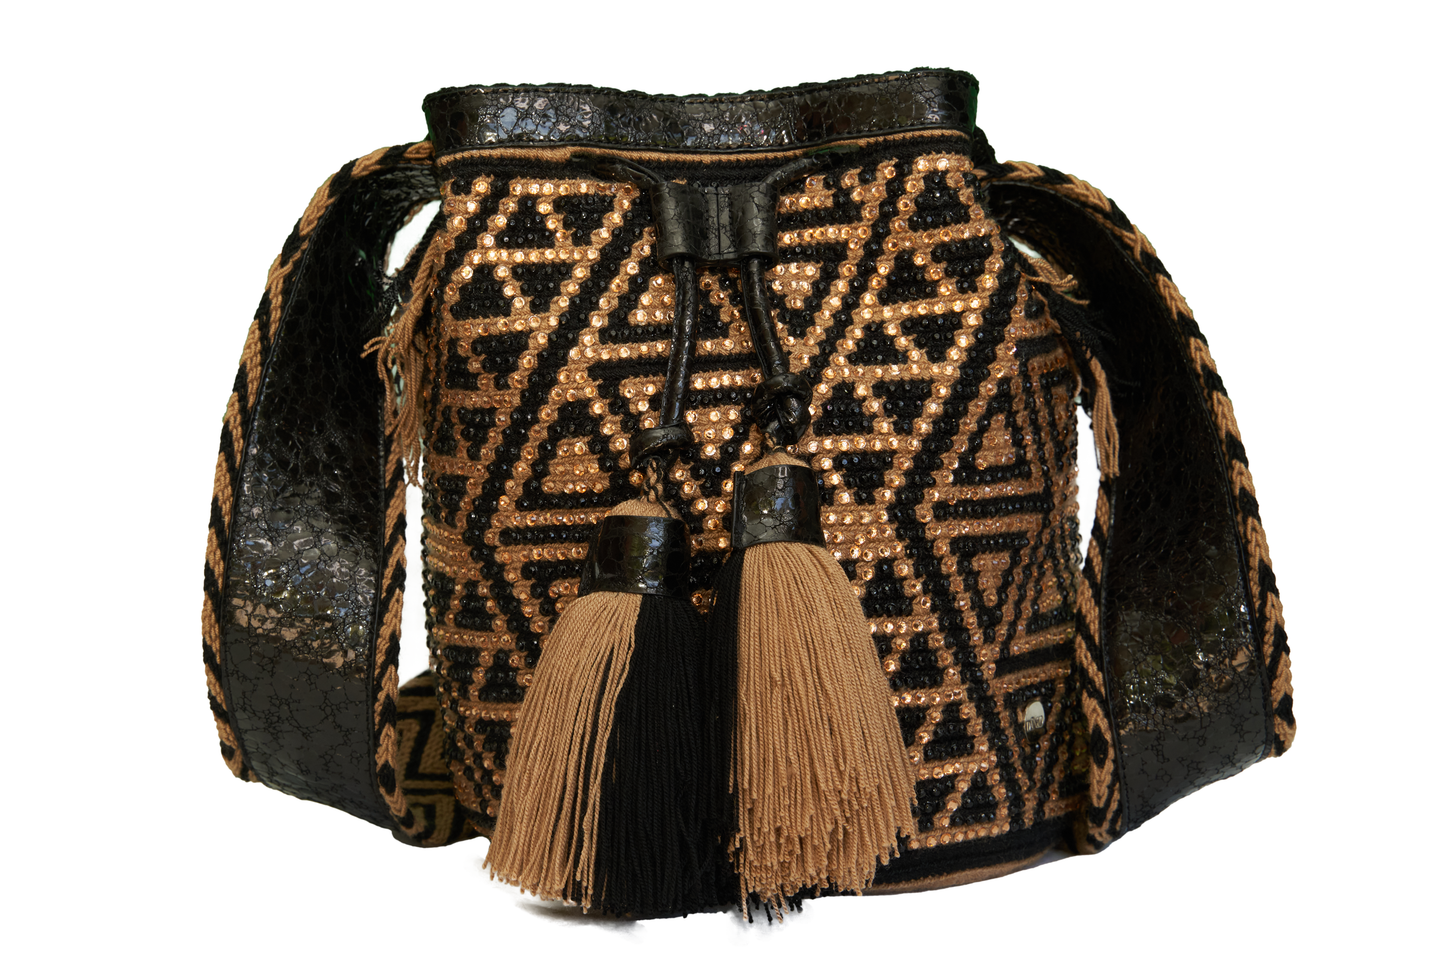 Black & Gold Leather Crochet Bag with Gems. The mochila also has 2 tassels